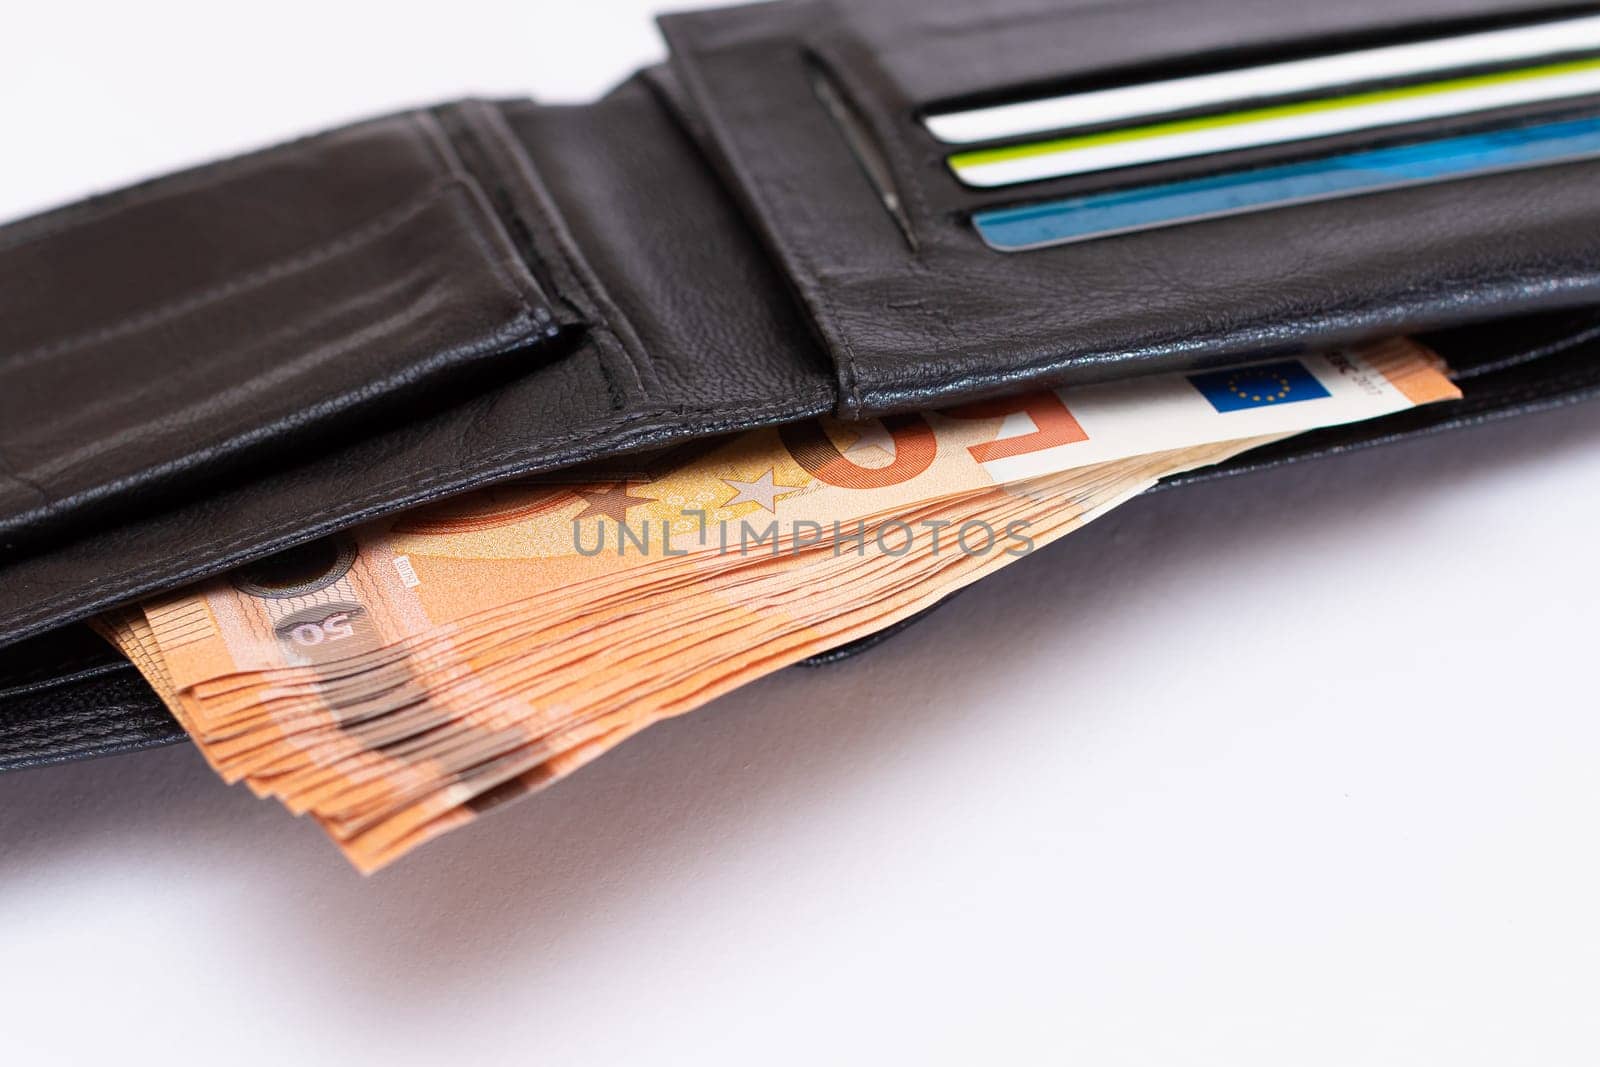 Opened Black Leather Men Wallet with Fifty Euro Banknotes and Bank Cards Inside on White Background. A Purse Full of Money and Credit Cards Symbolizing Wealth, Success and Social Status